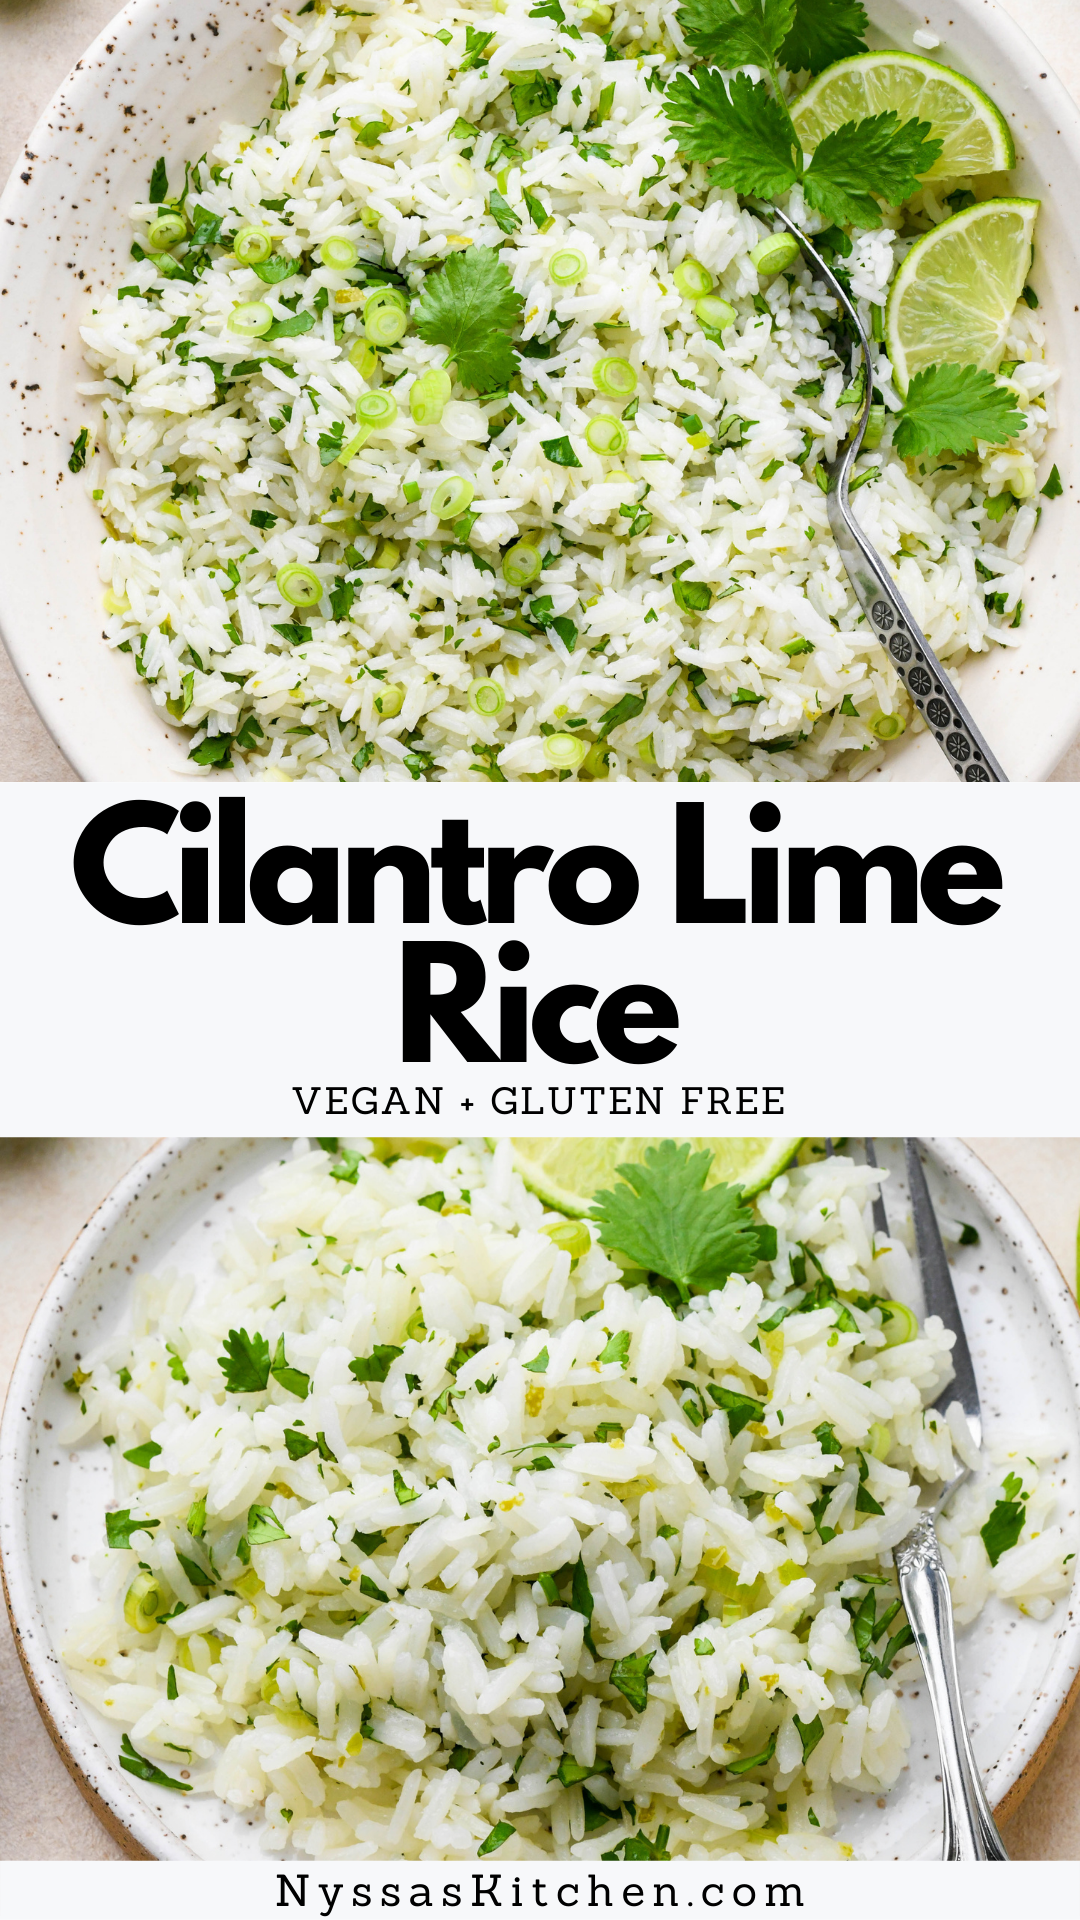 Cilantro lime rice is the perfect simple side dish for any Mexican inspired dinner! Made with just a handful of simple ingredients and absolutely loaded with zesty flavor. Easy to make and so delicious! Gluten free, dairy free, vegan, and vegetarian.